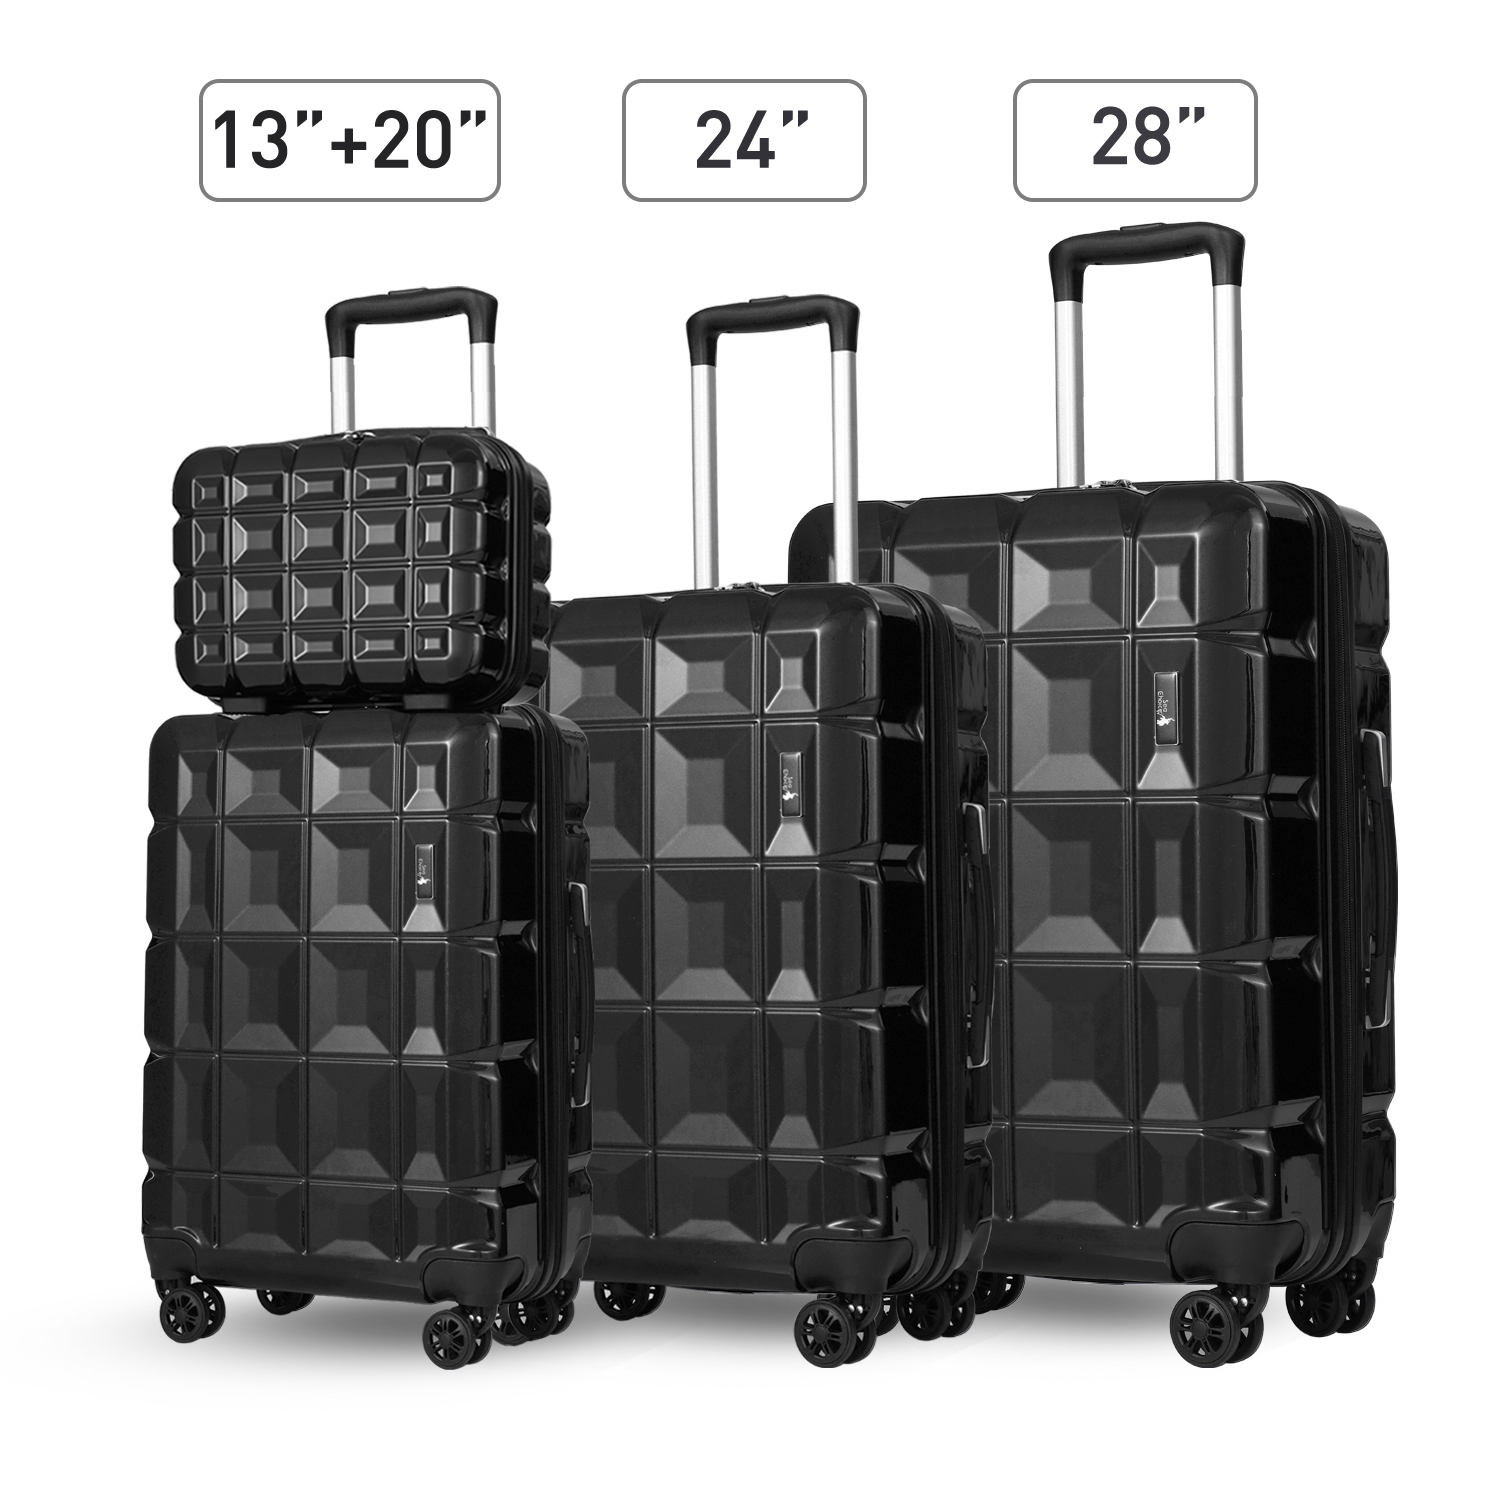 Luggage 10 Piece Sets Clearance,Large Suitcase Set Spinner Wheels with TSA  Locks,Hard Shell Luggage Sets for Women Travel Suitcase (Grey Bro並行輸入品 通販 